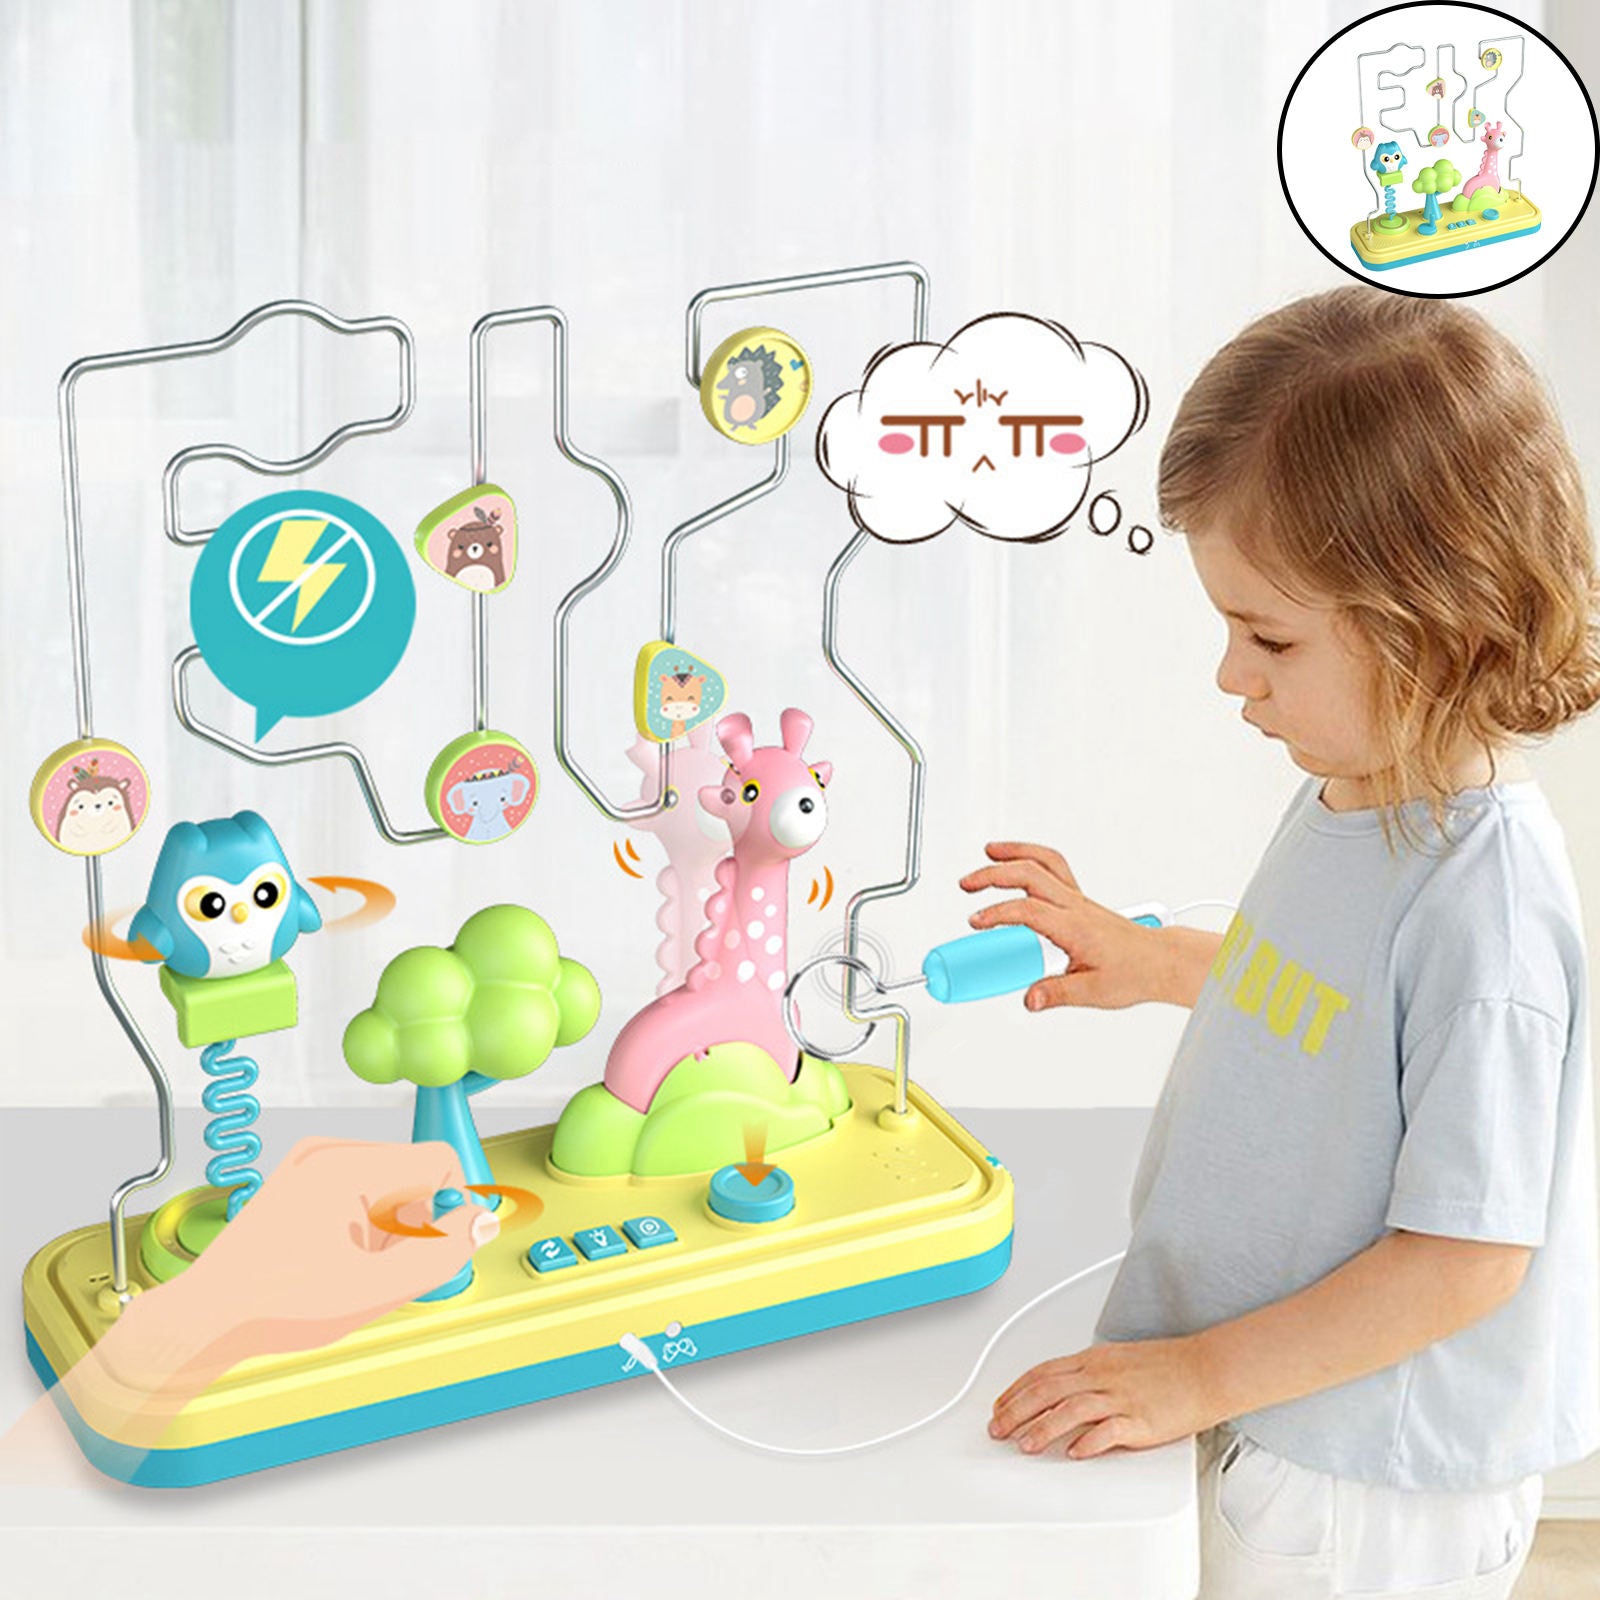 Electric Bump Maze Game Early Educational Toys for Boys Girls Adults Gifts